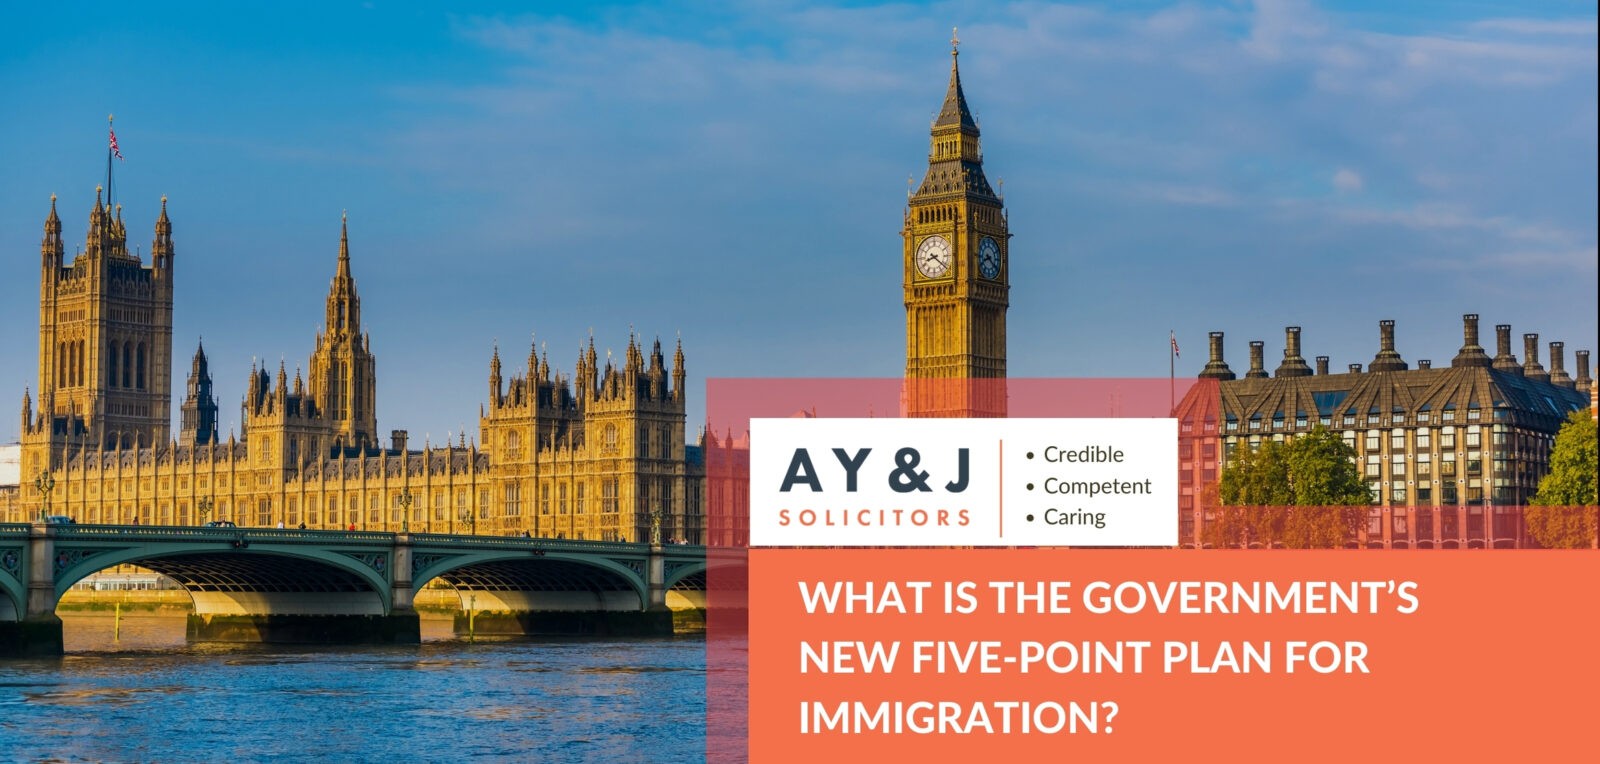 What Is The Government’s New Five-Point Plan For Immigration?